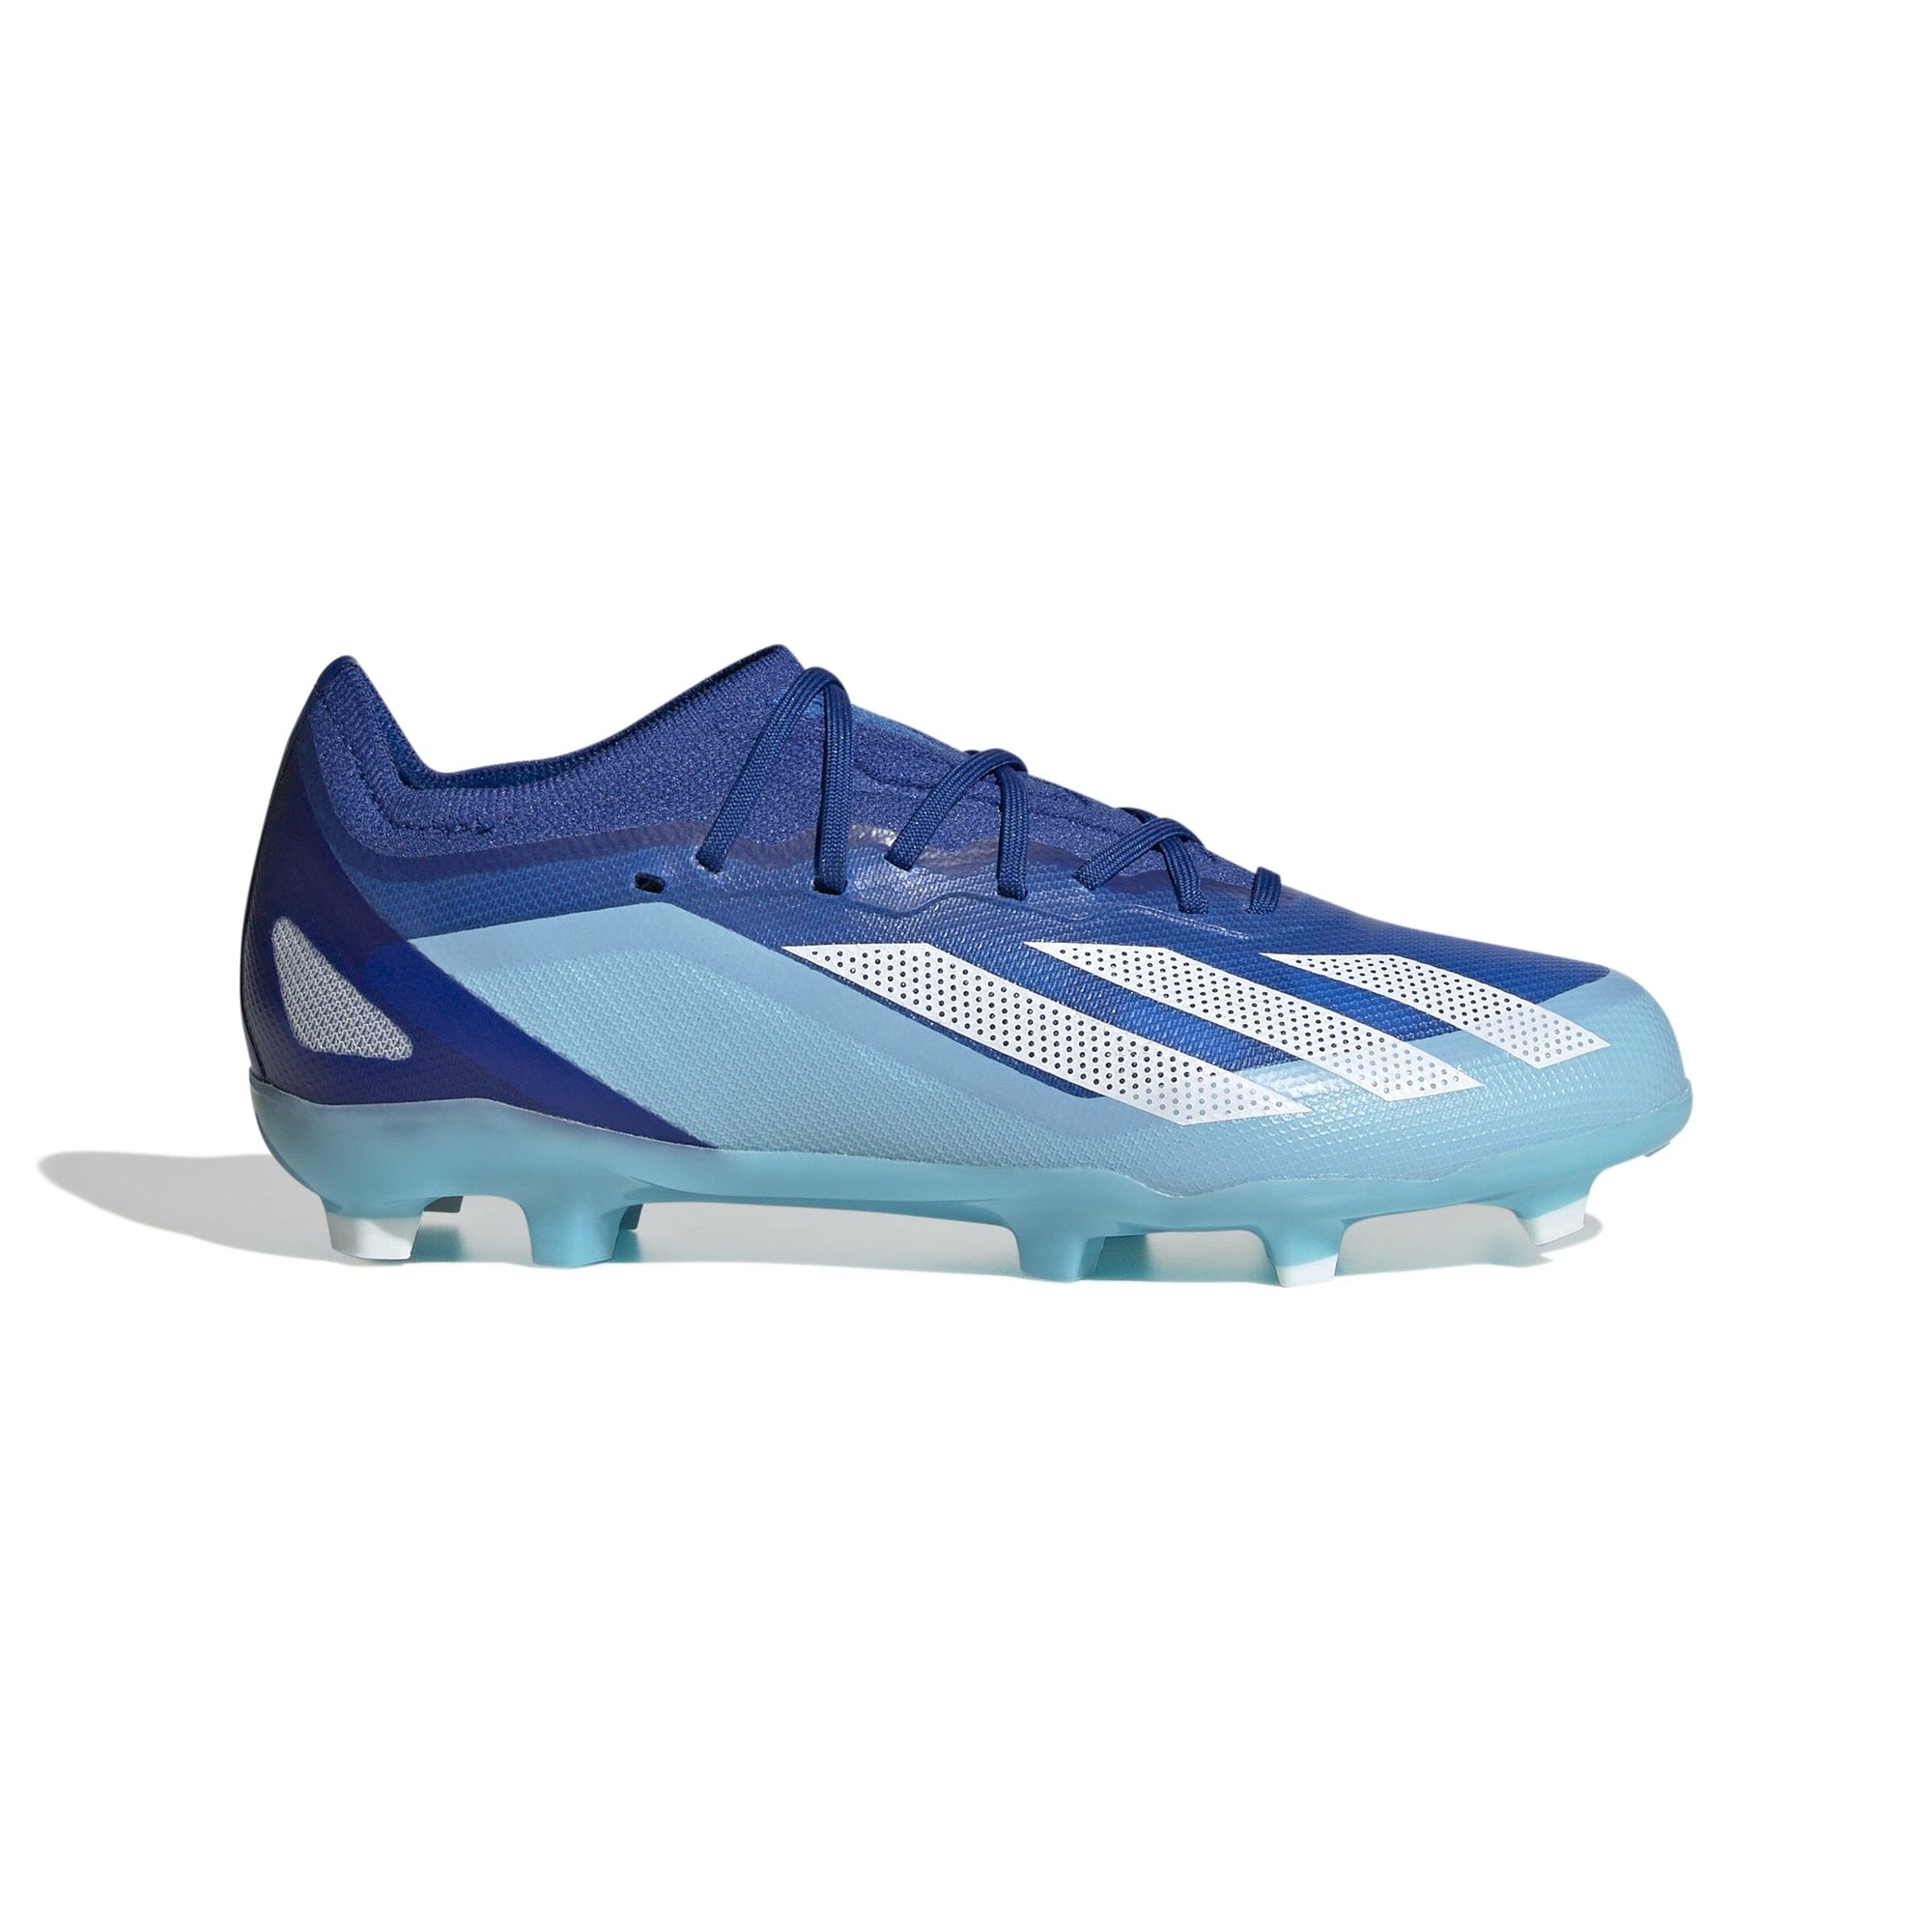 adidas Youth X Crazyfast.1 Firm Ground | IE4209 Cleats Adidas 1 Bright Royal / FTWR White / Bliss Blue 